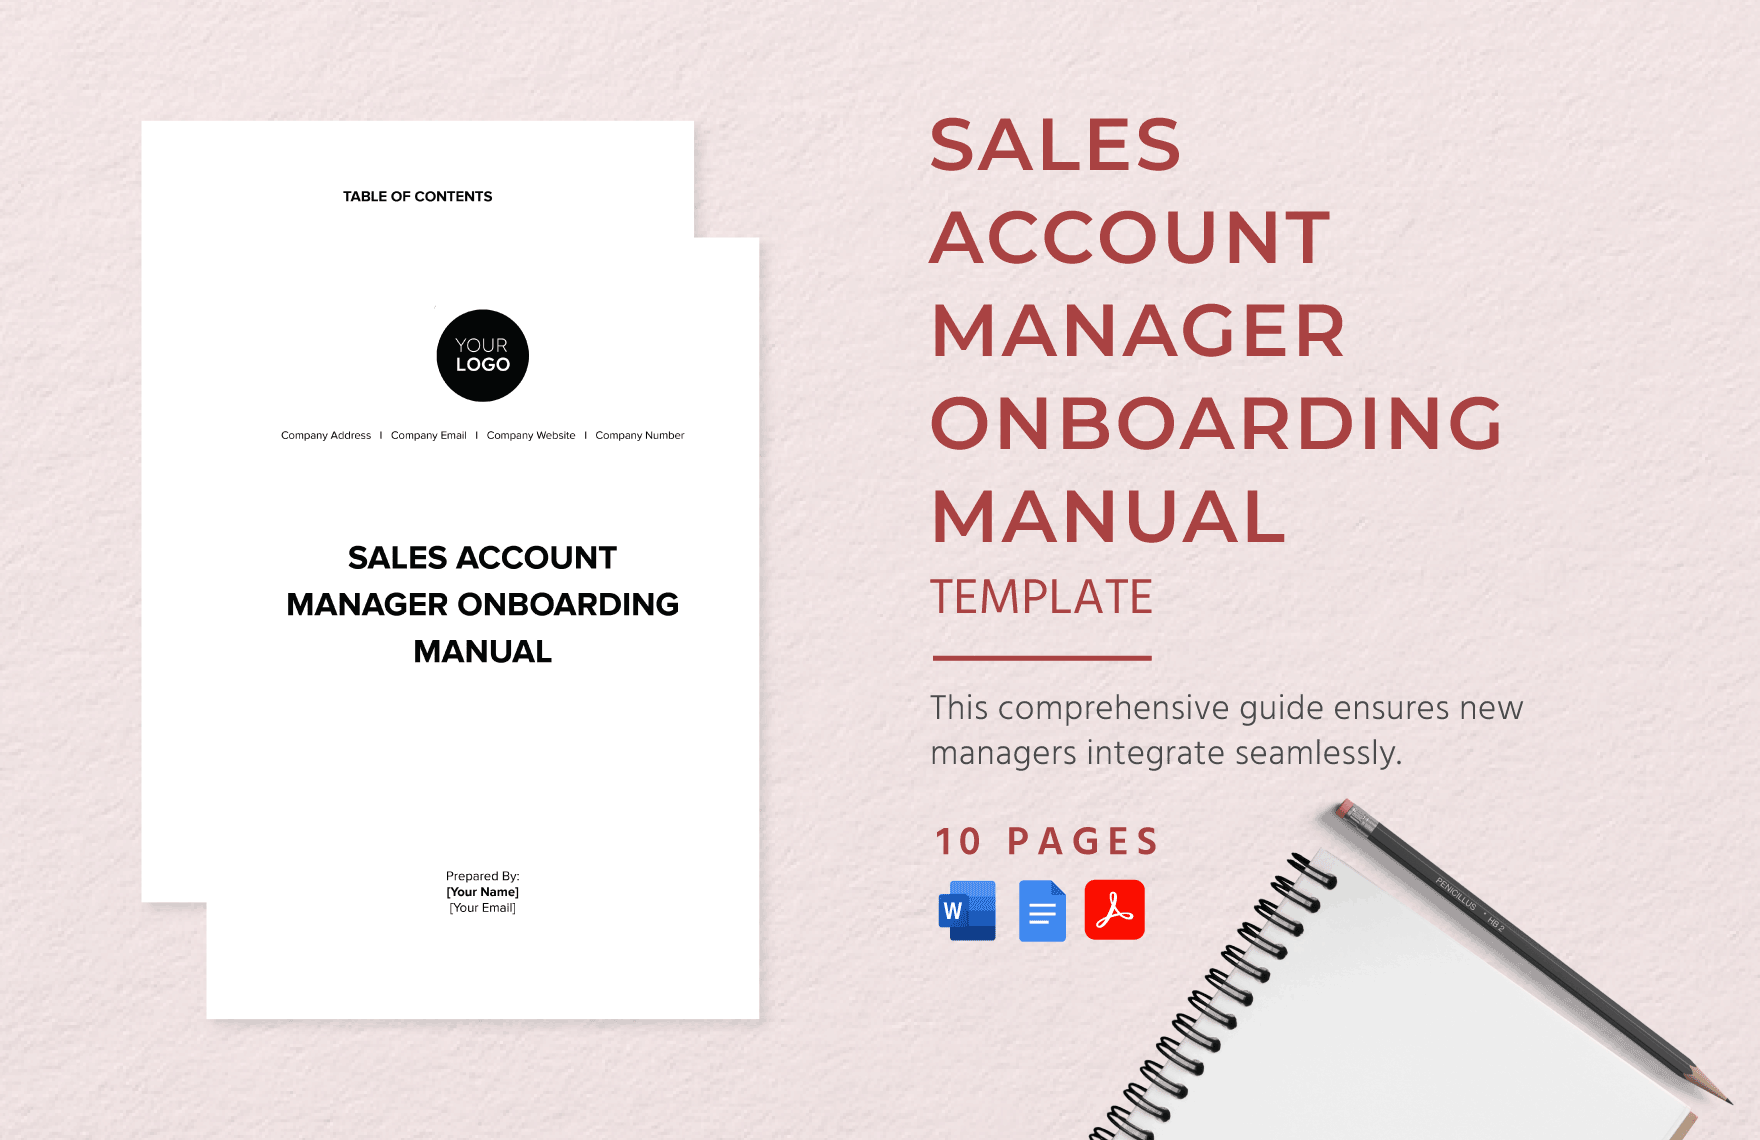 Sales Account Manager Onboarding Manual Template